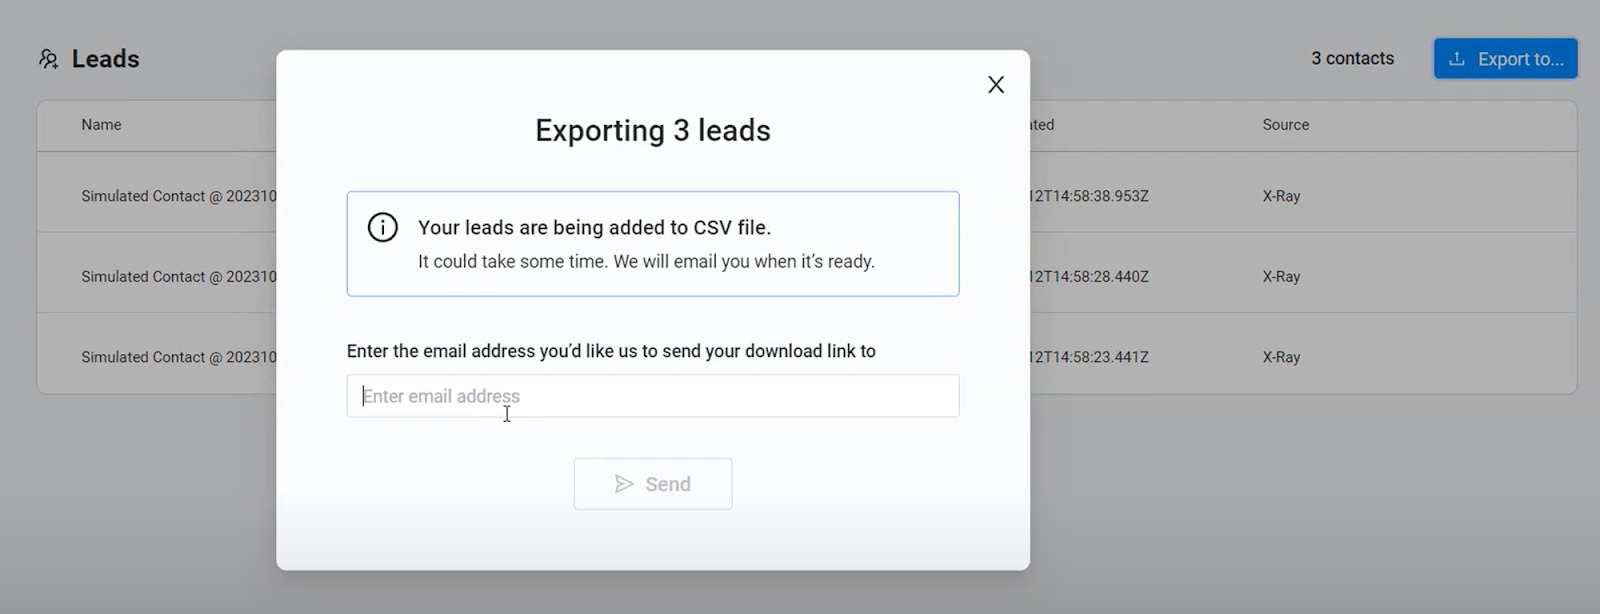 Exporting the leads generated by the X-Ray app.